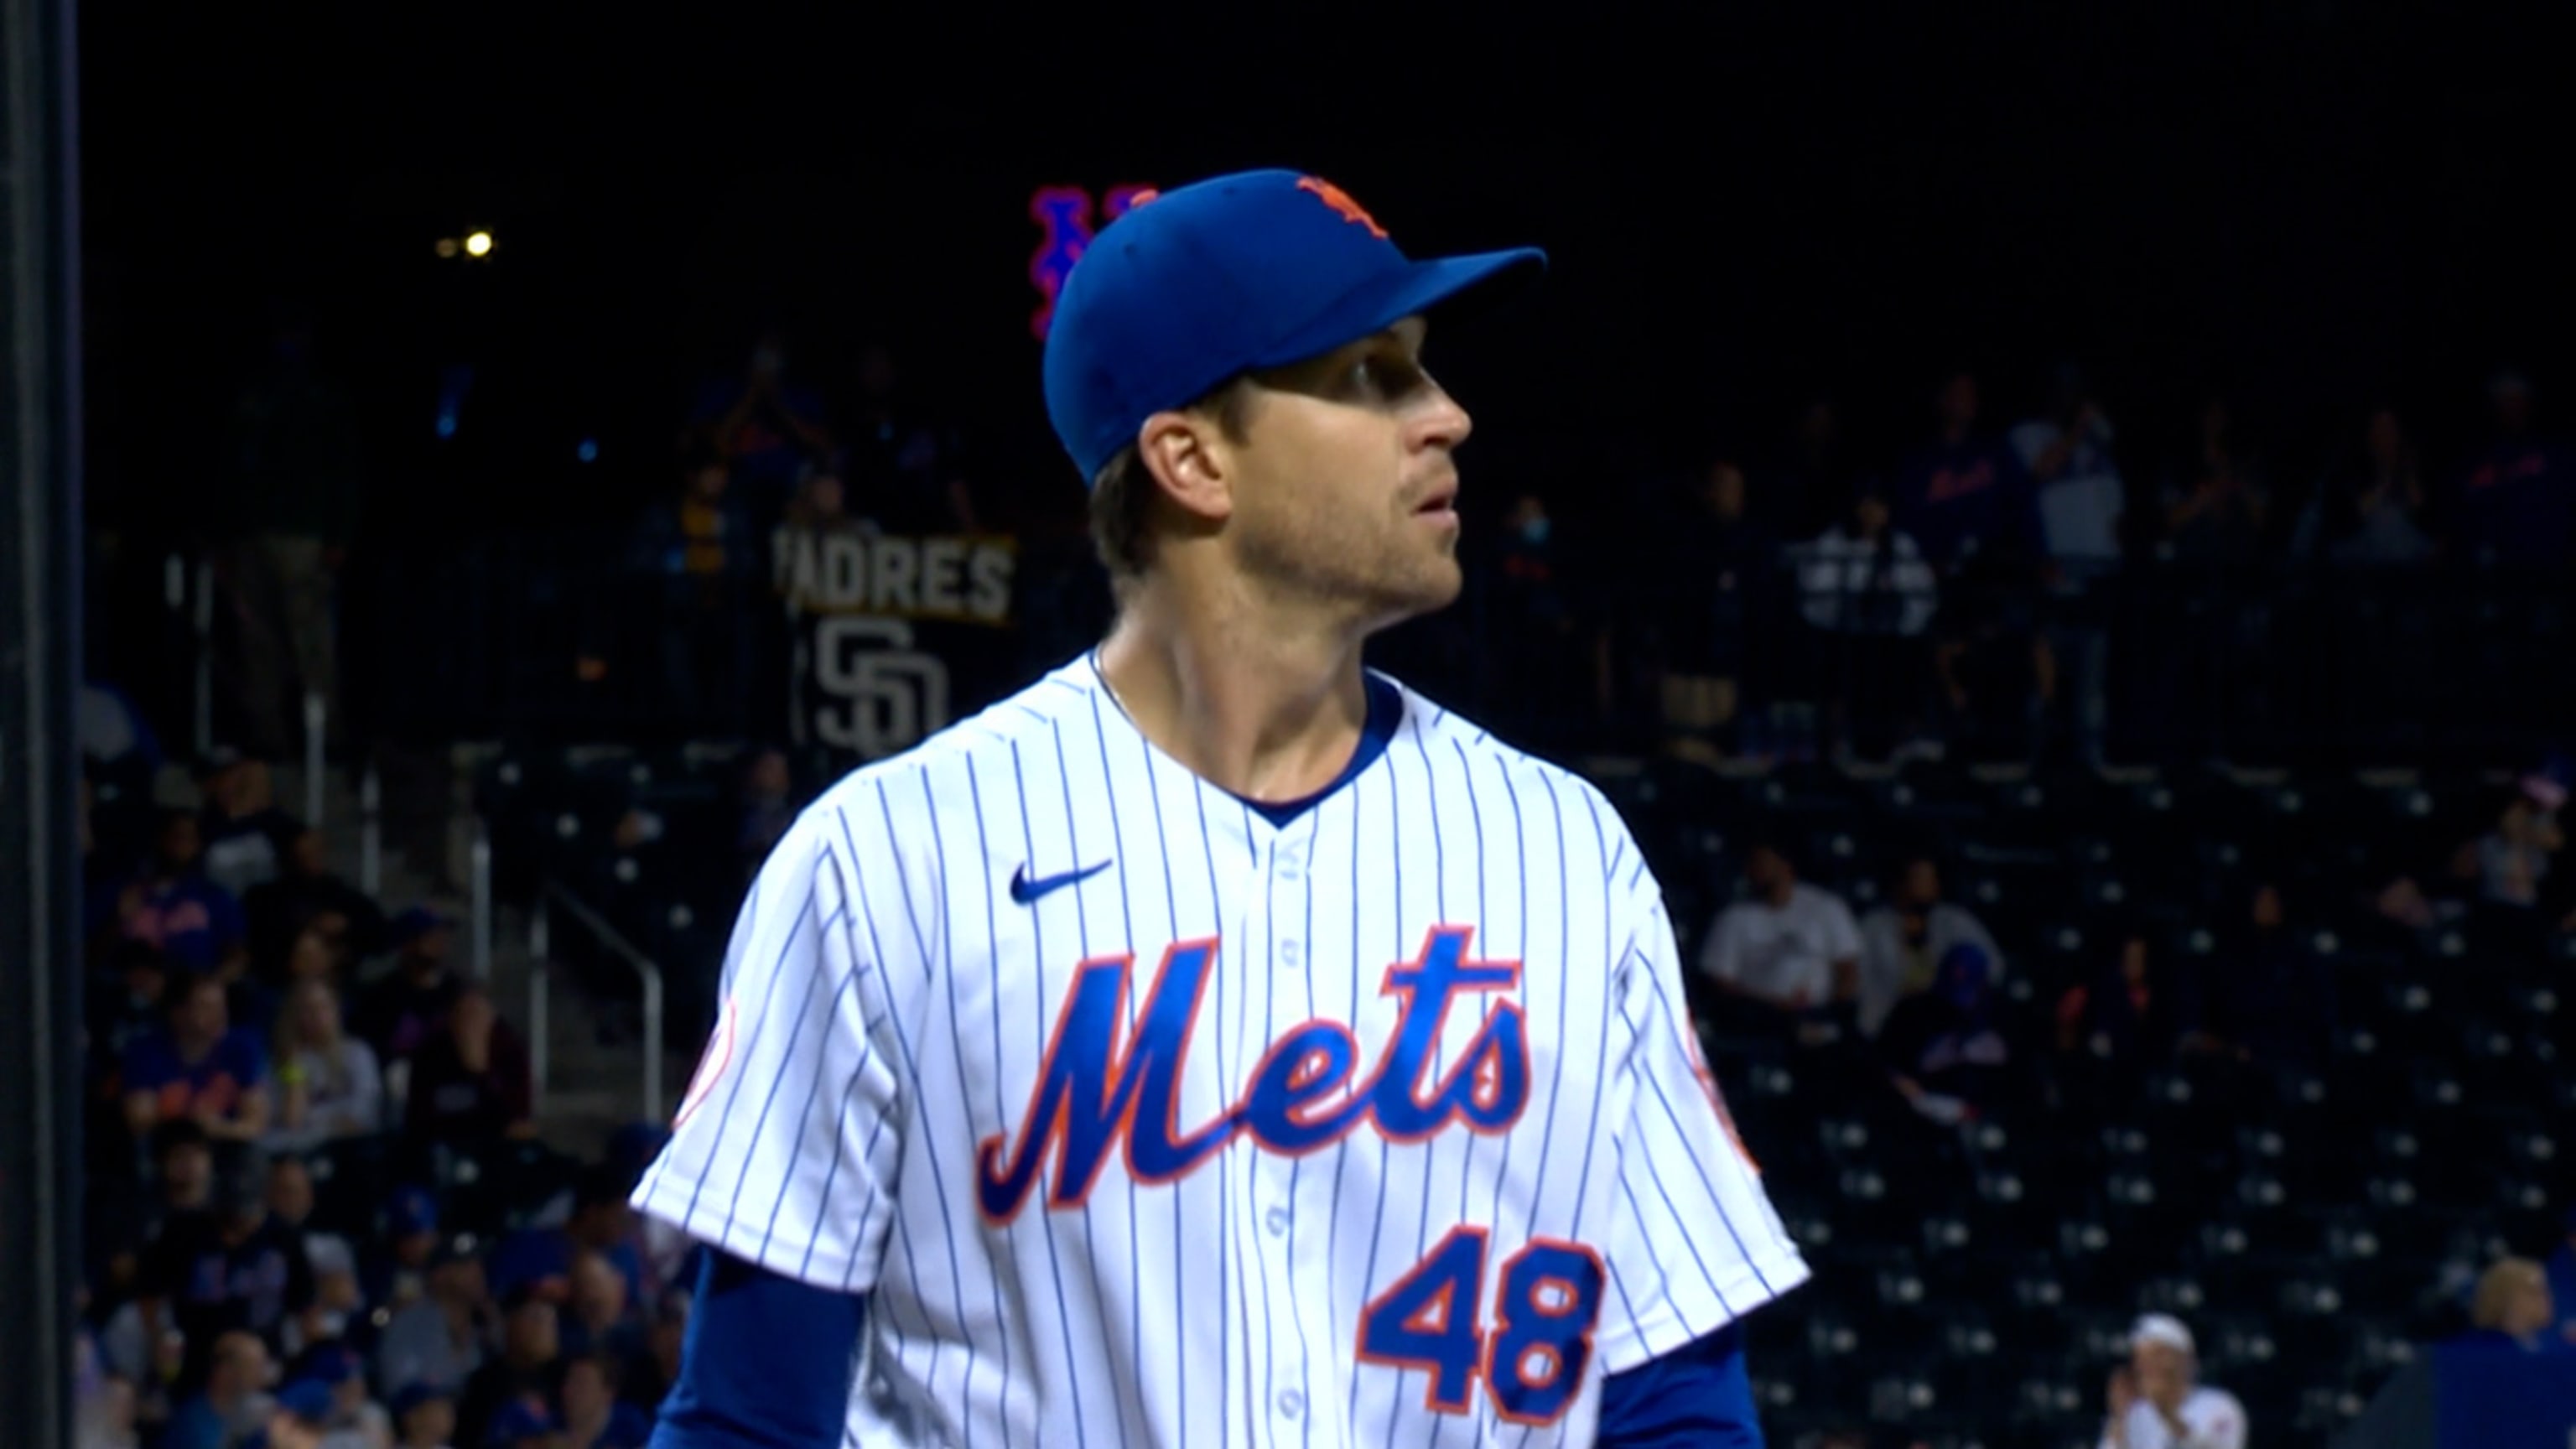 Jacob deGrom vs. Pitchers at the Plate Is the Most Lopsided